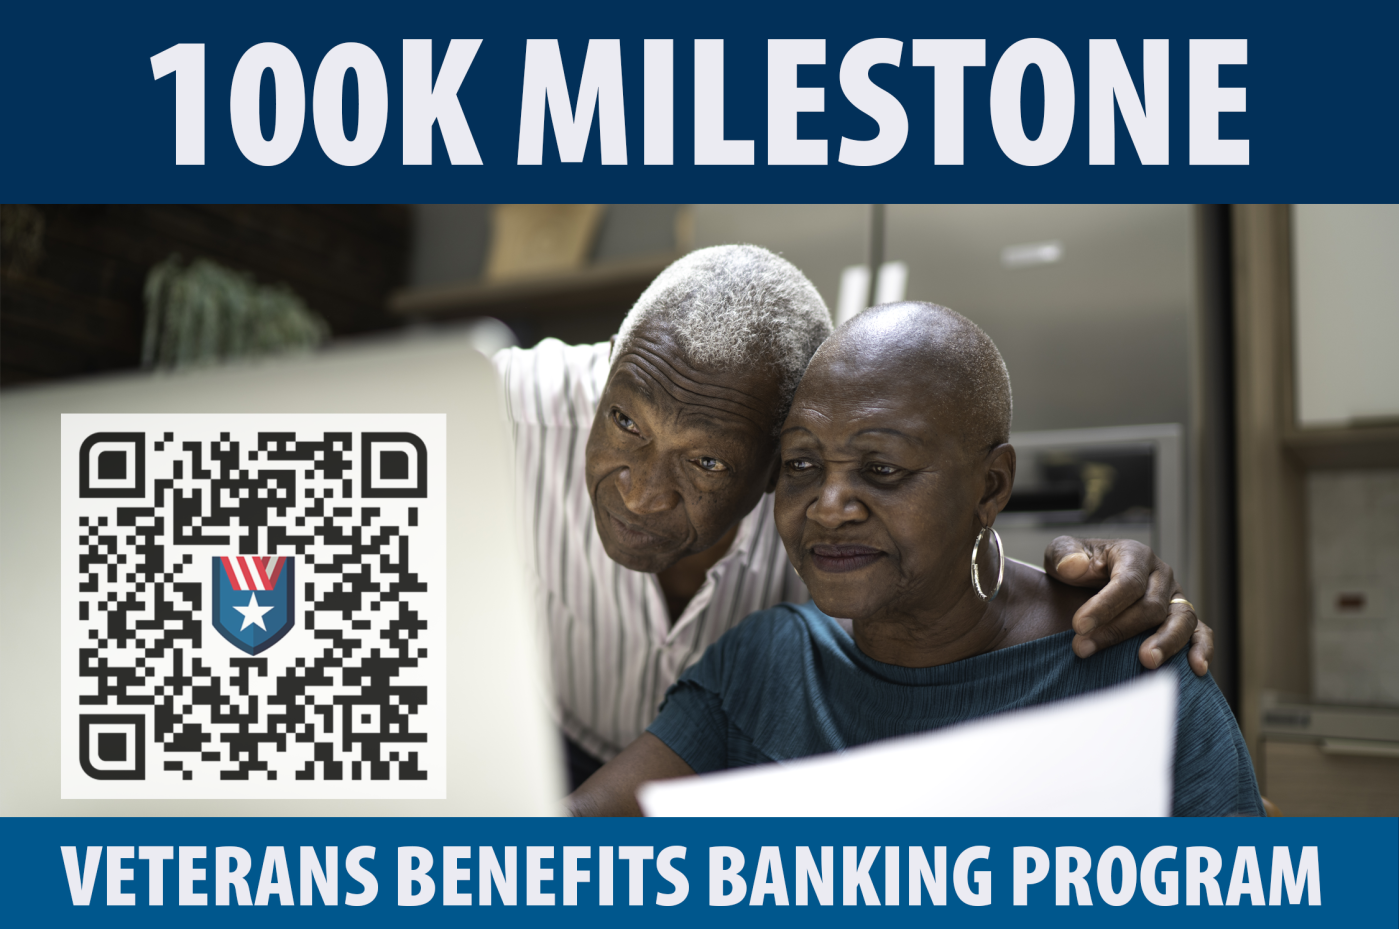 100,000 Veterans have switched to direct deposit to protect their benefits